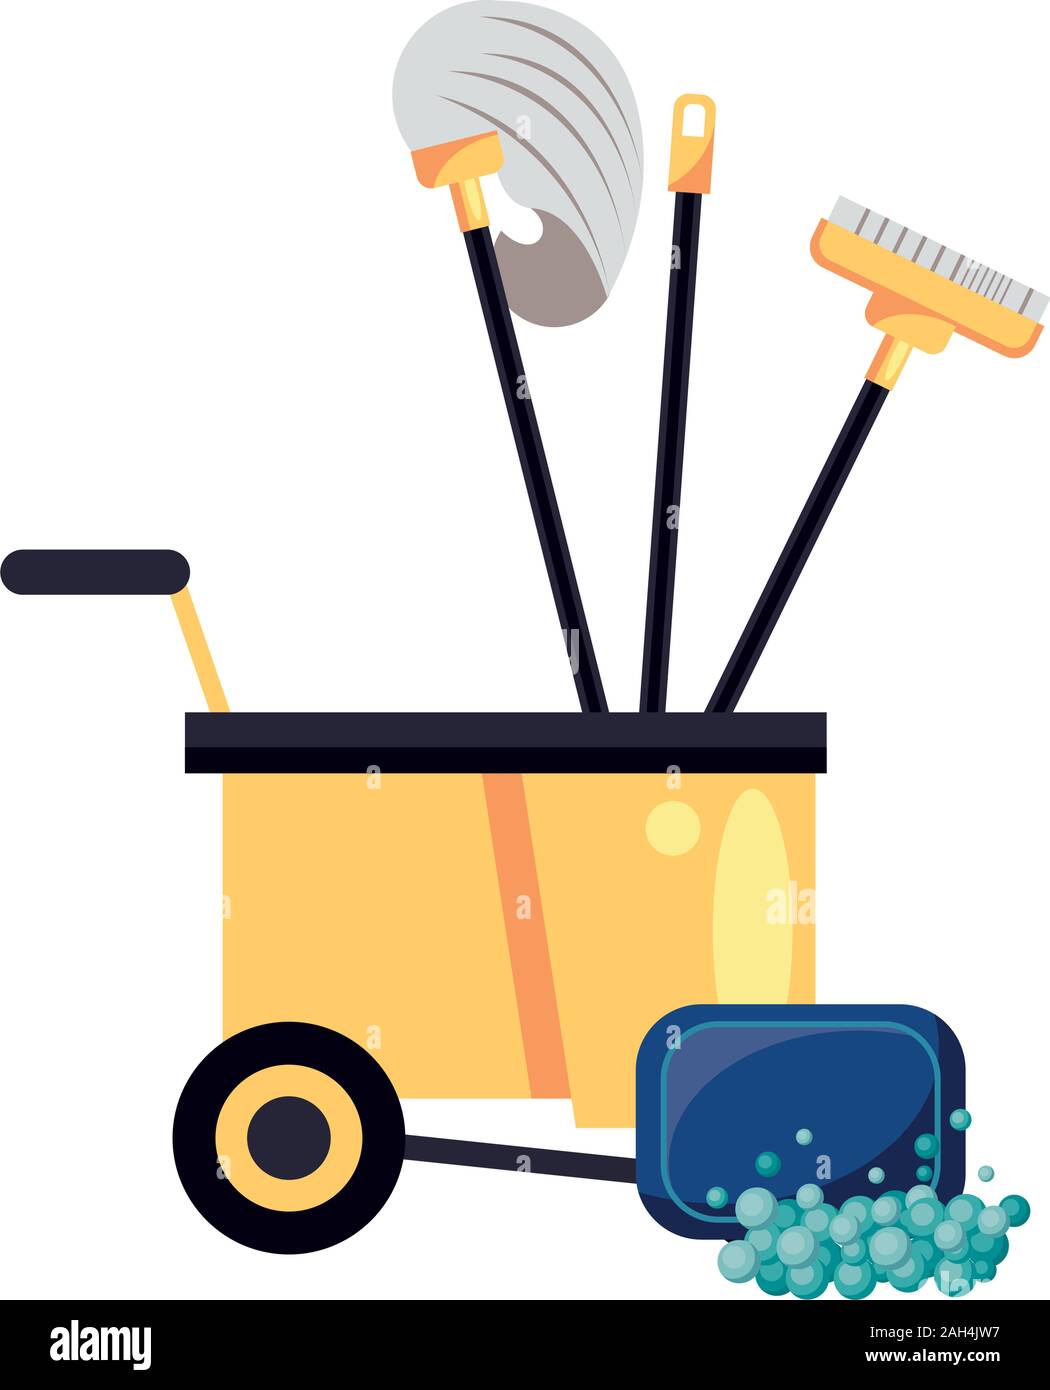 https://c8.alamy.com/comp/2AH4JW7/housekepping-cart-with-tools-cleaning-and-soap-bar-2AH4JW7.jpg